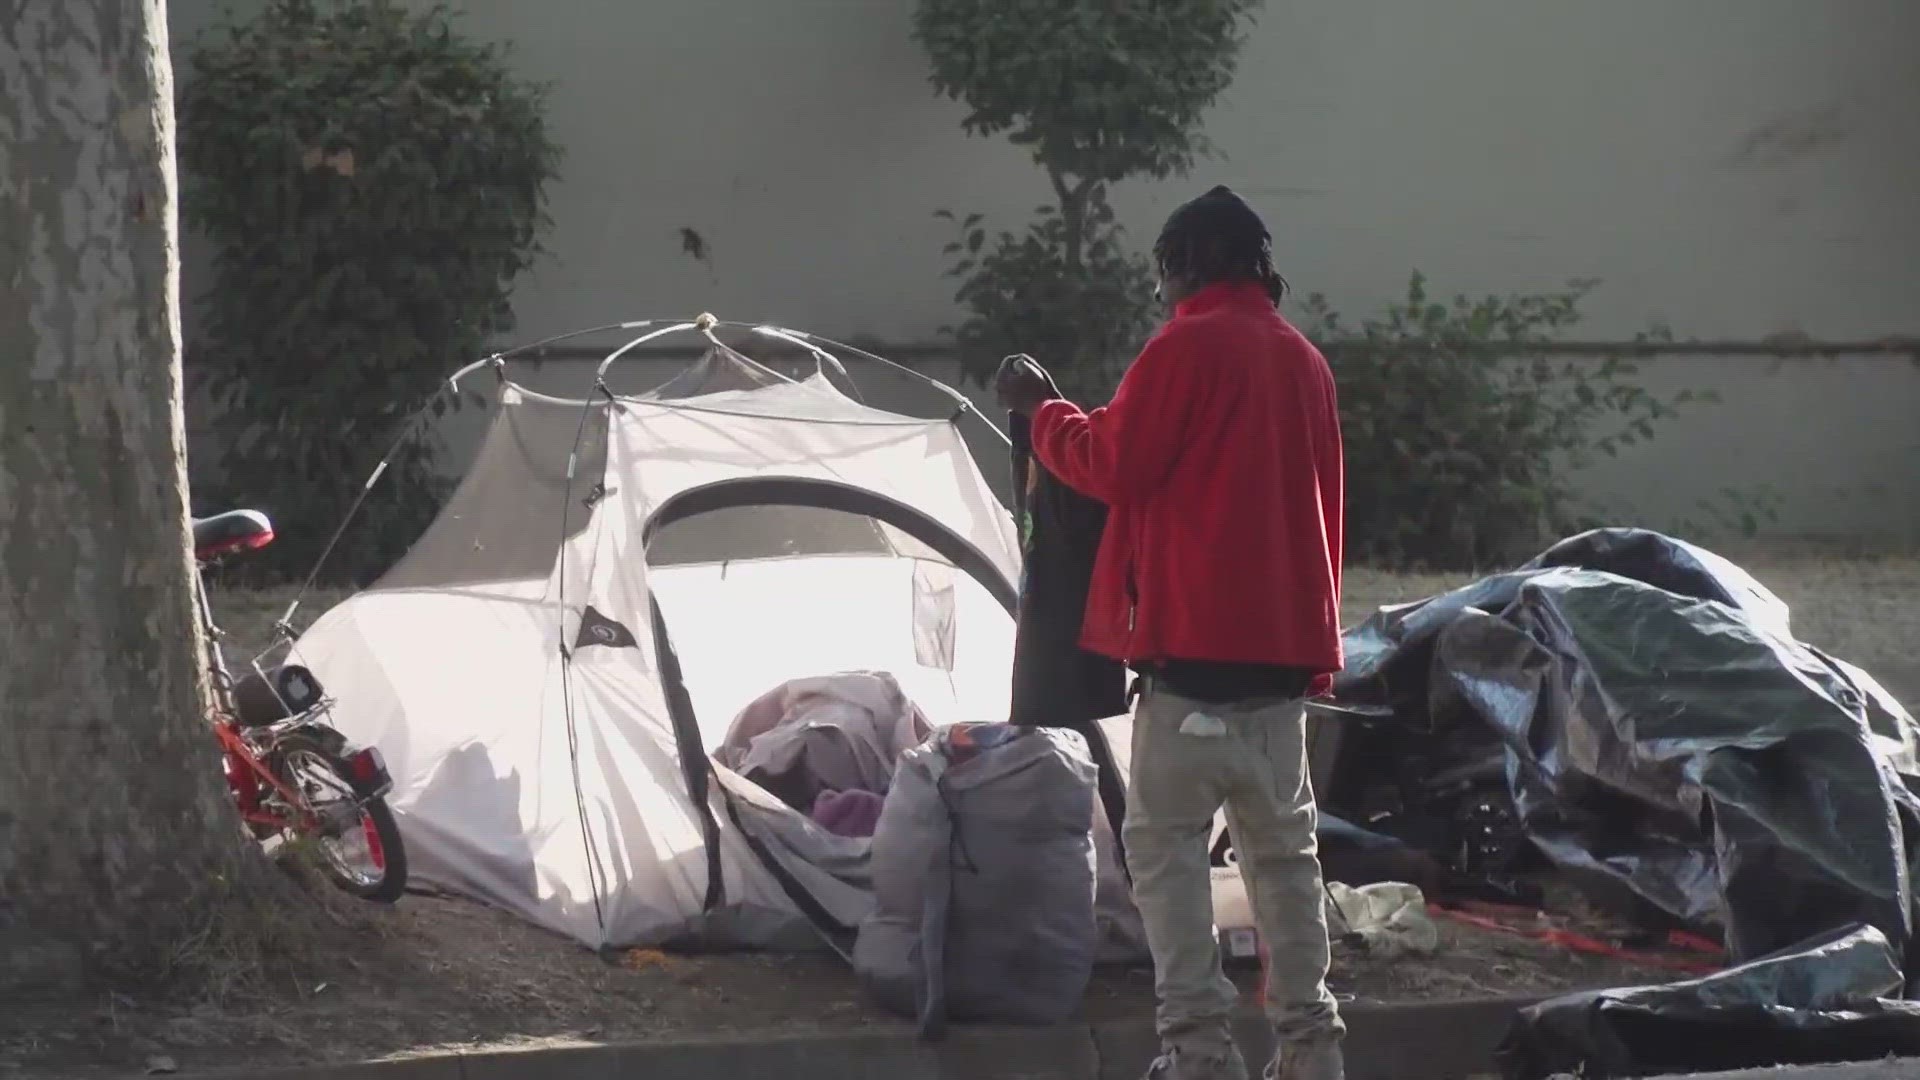 California's homelessness issue could go to the Supreme Court